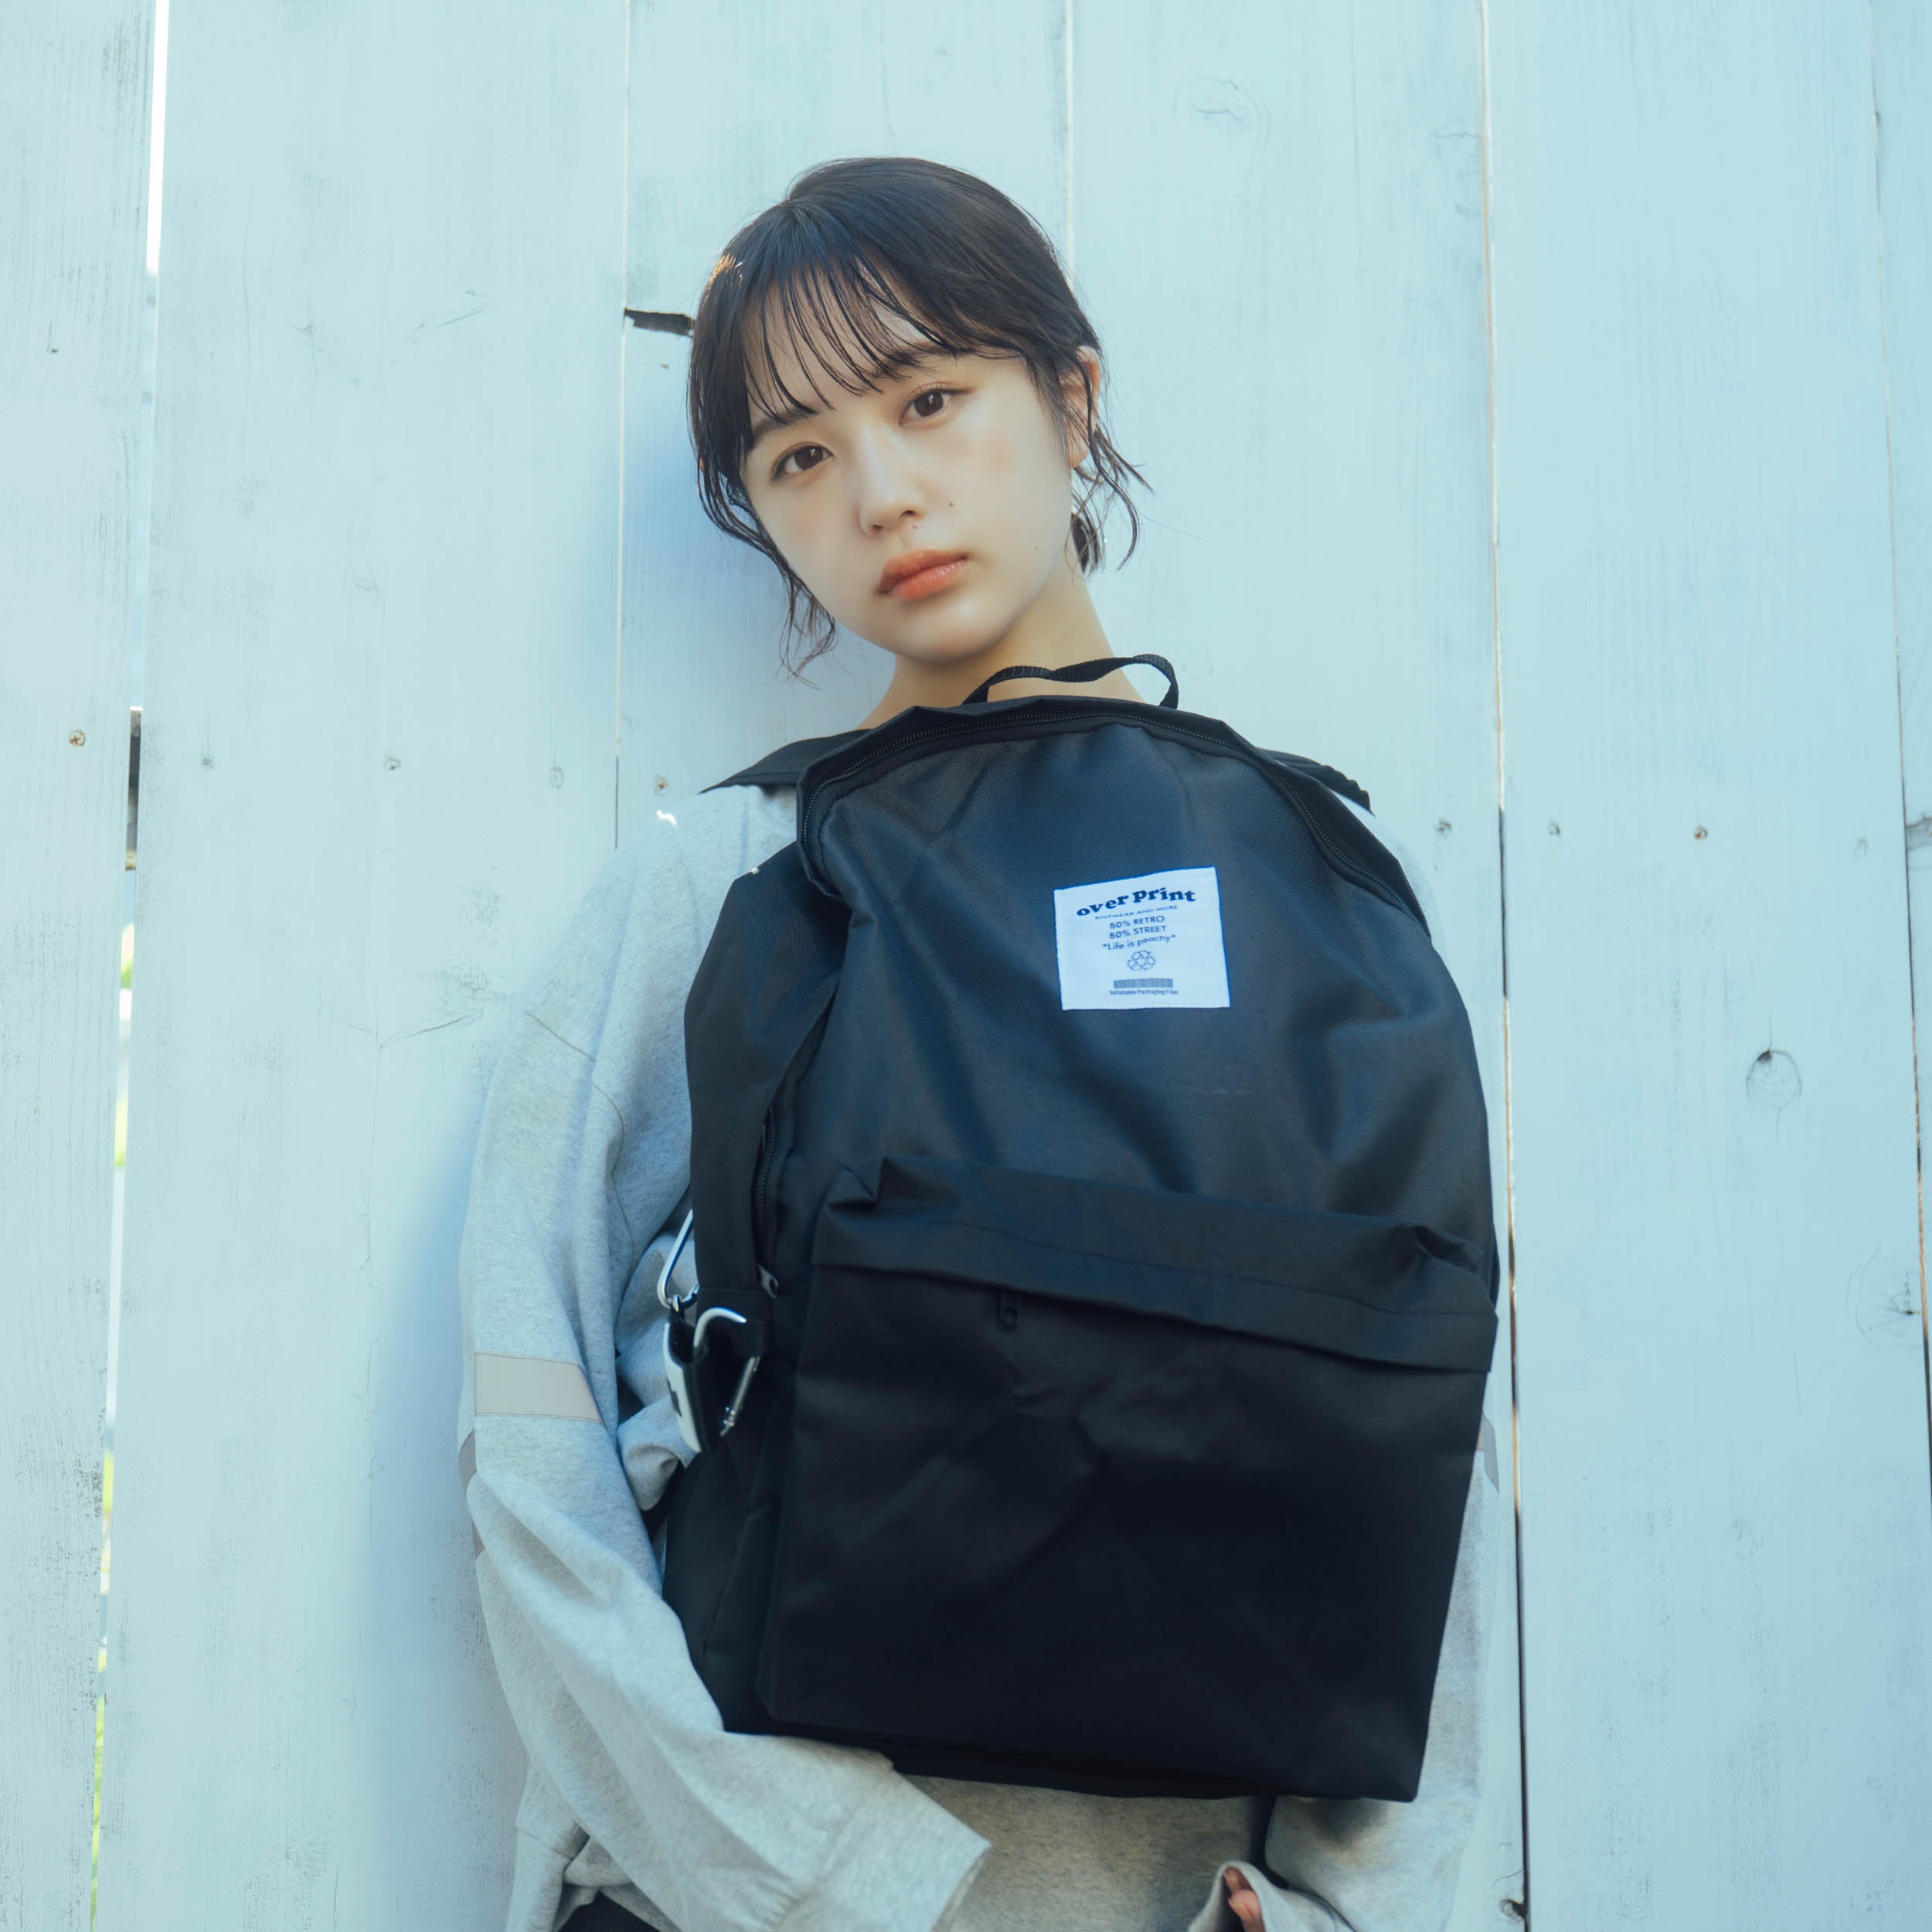 .co.jp 限定】over print BACKPACK MOOK 限定「over print